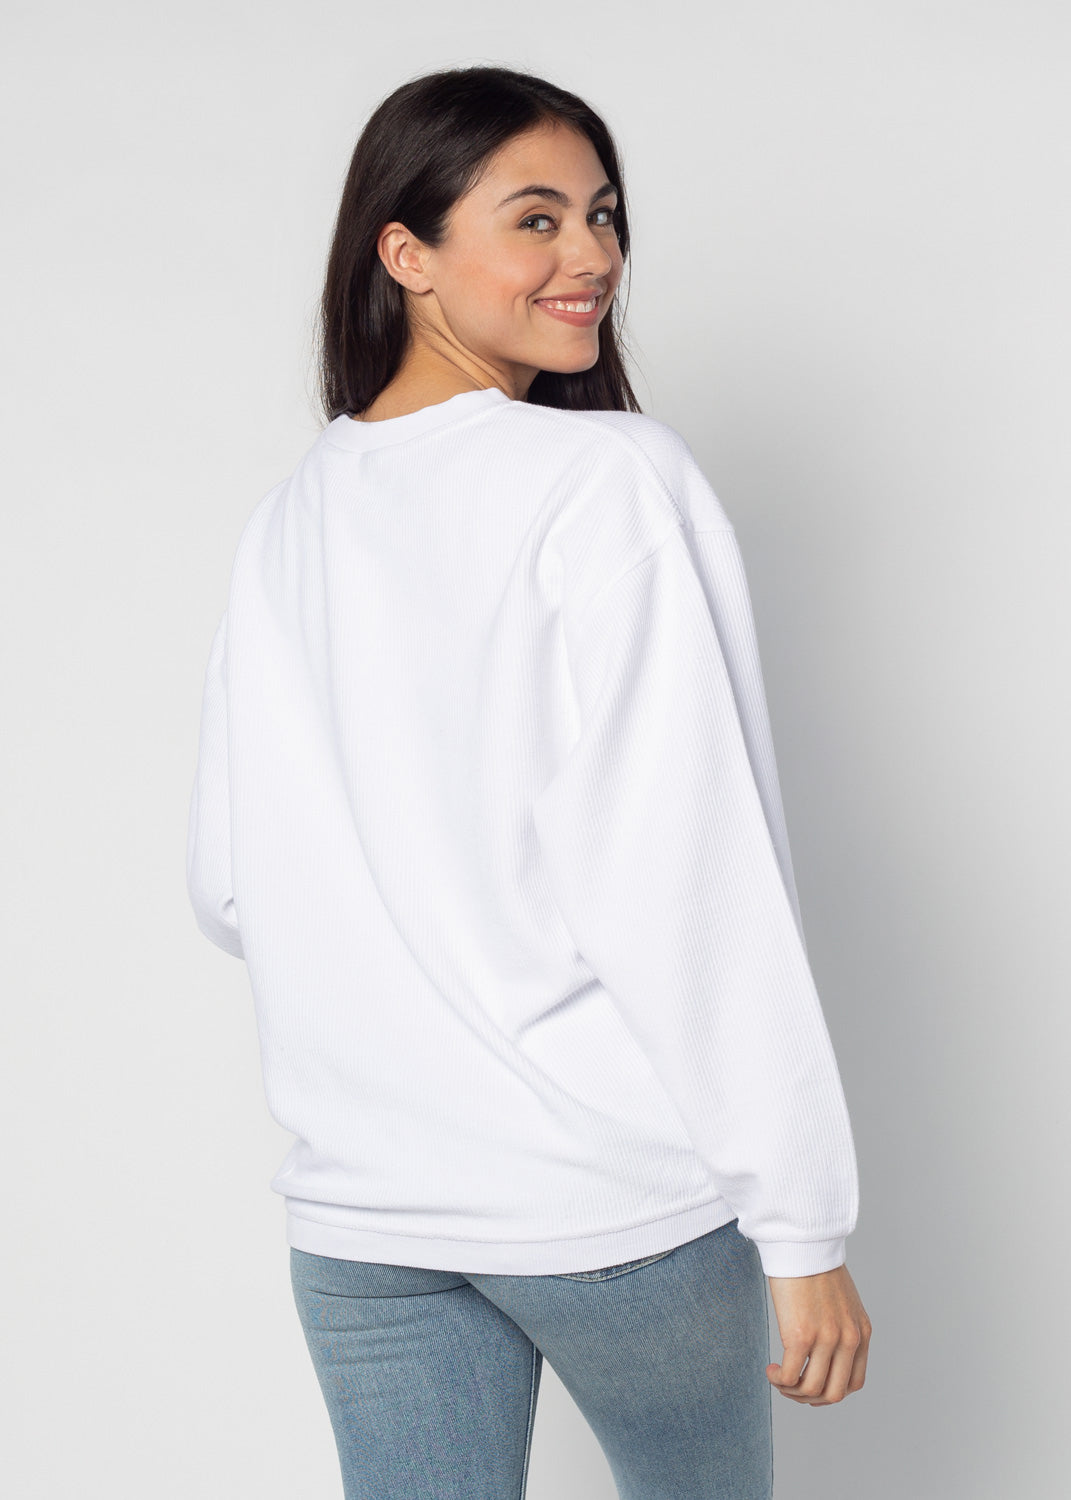 Back view of woman wearing a white corded crew